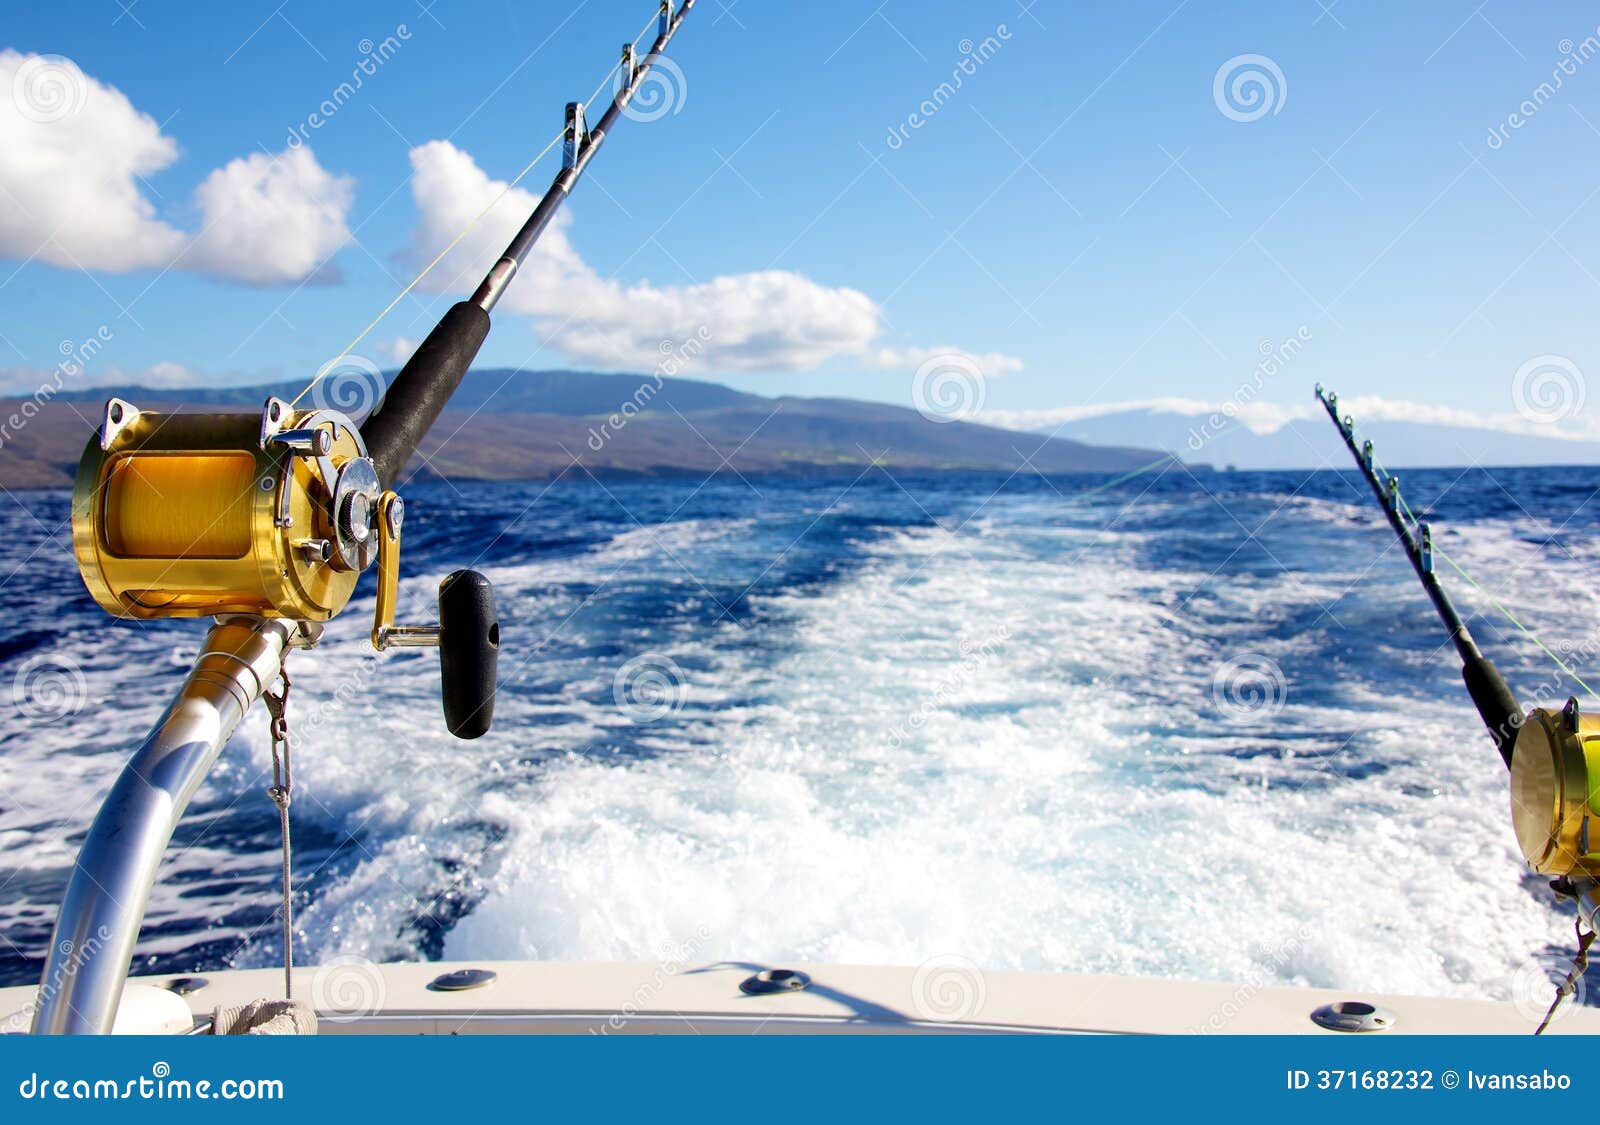 sea fishing rods and reels trolling behind a fishing boat in the open ...